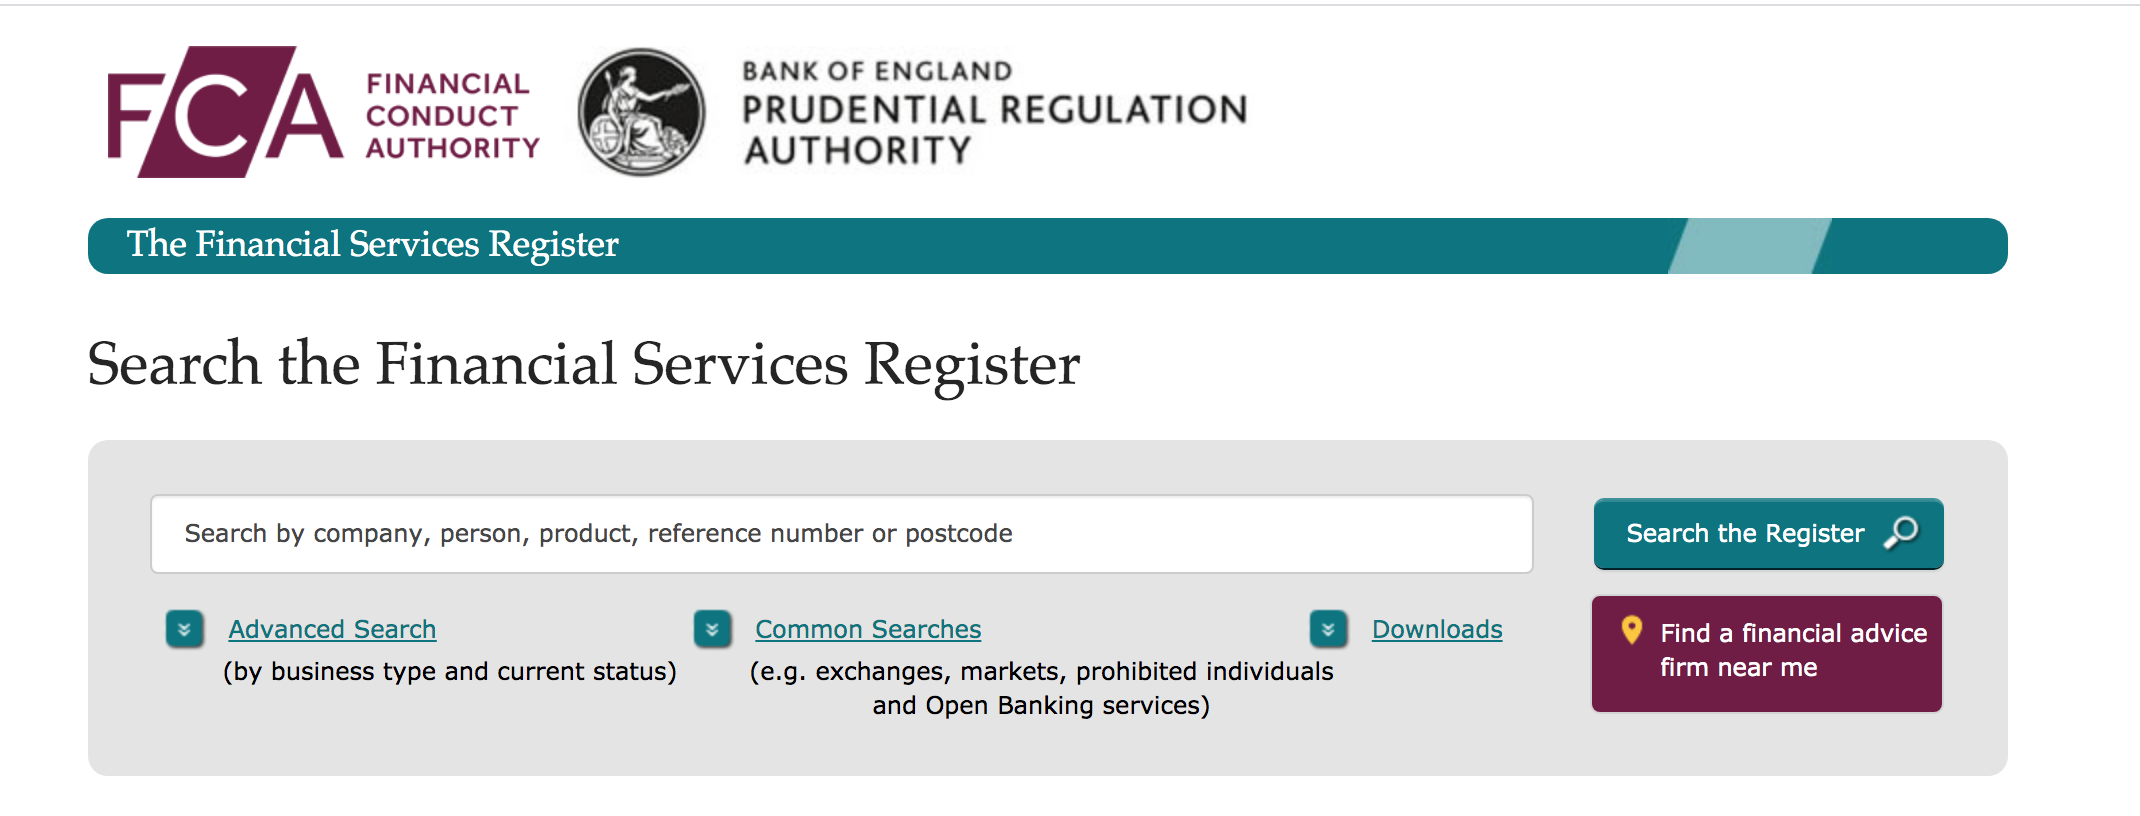 Financial Conduct Authority (FCA) home page